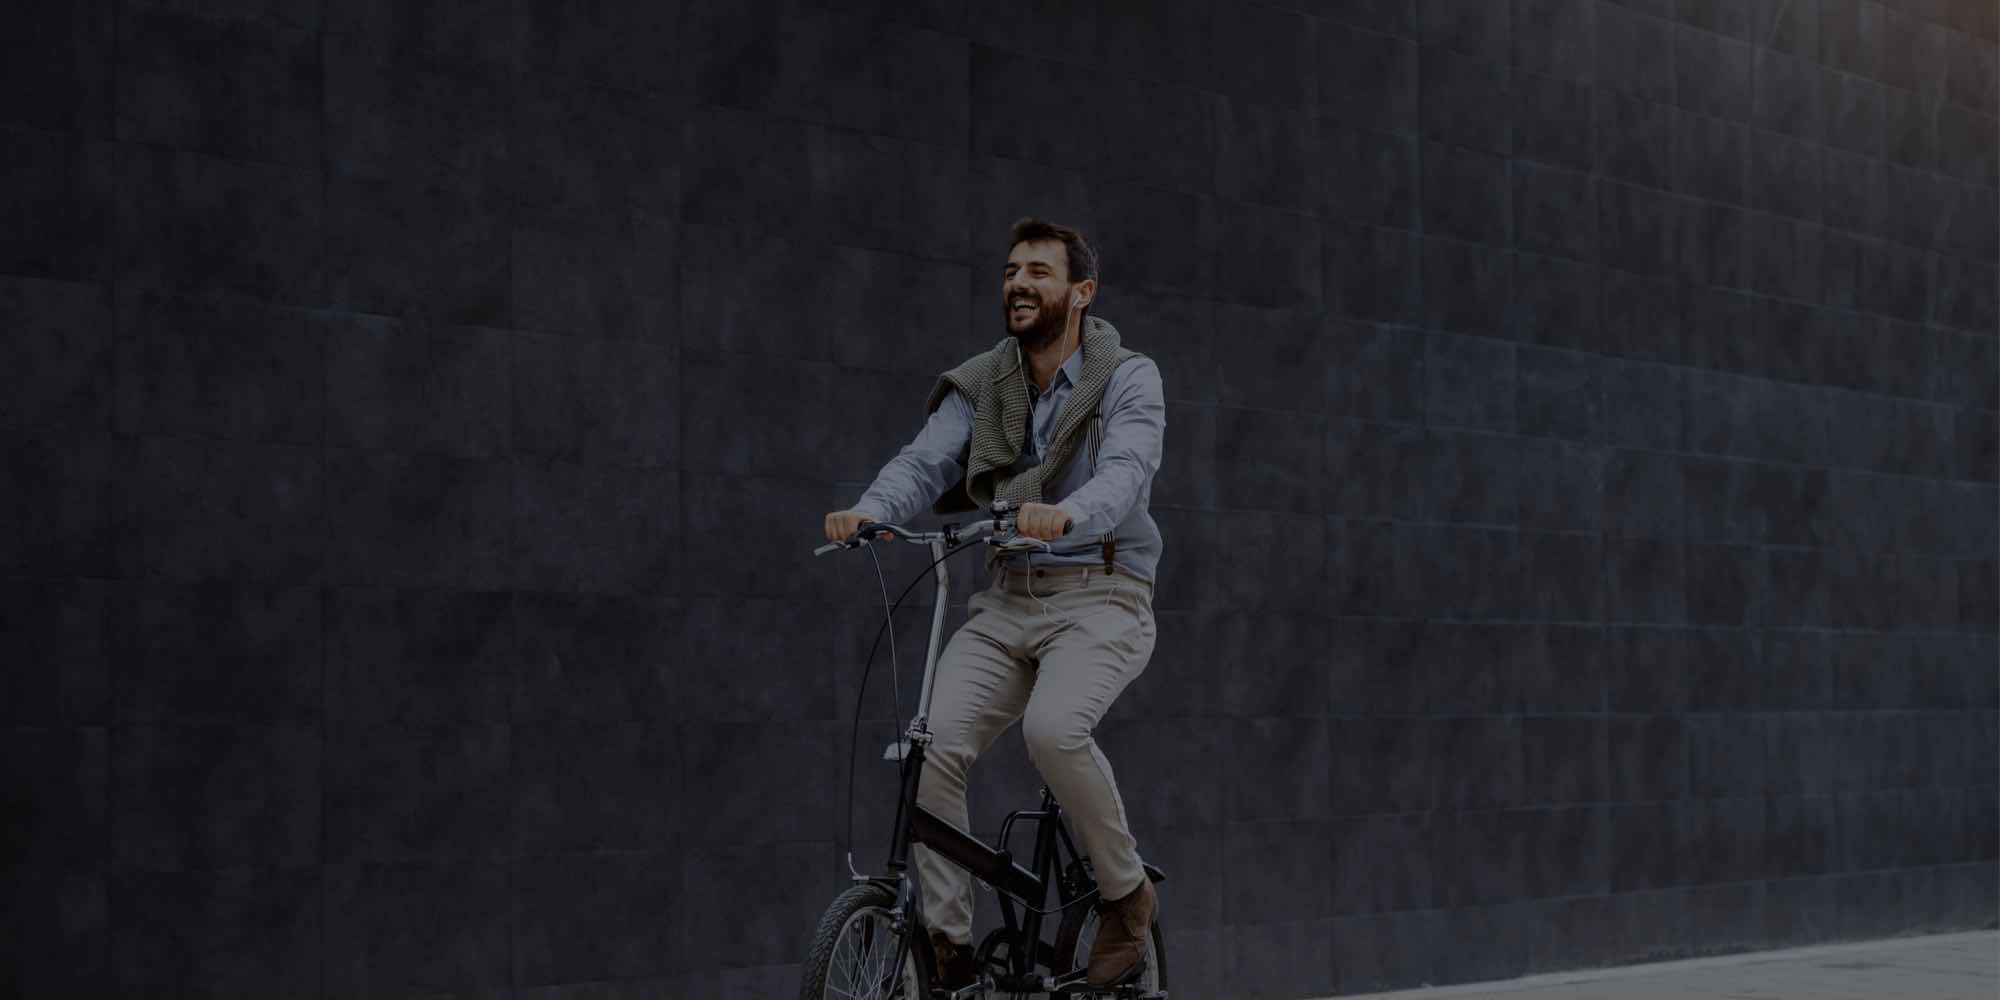 Man riding bike with smile on his face